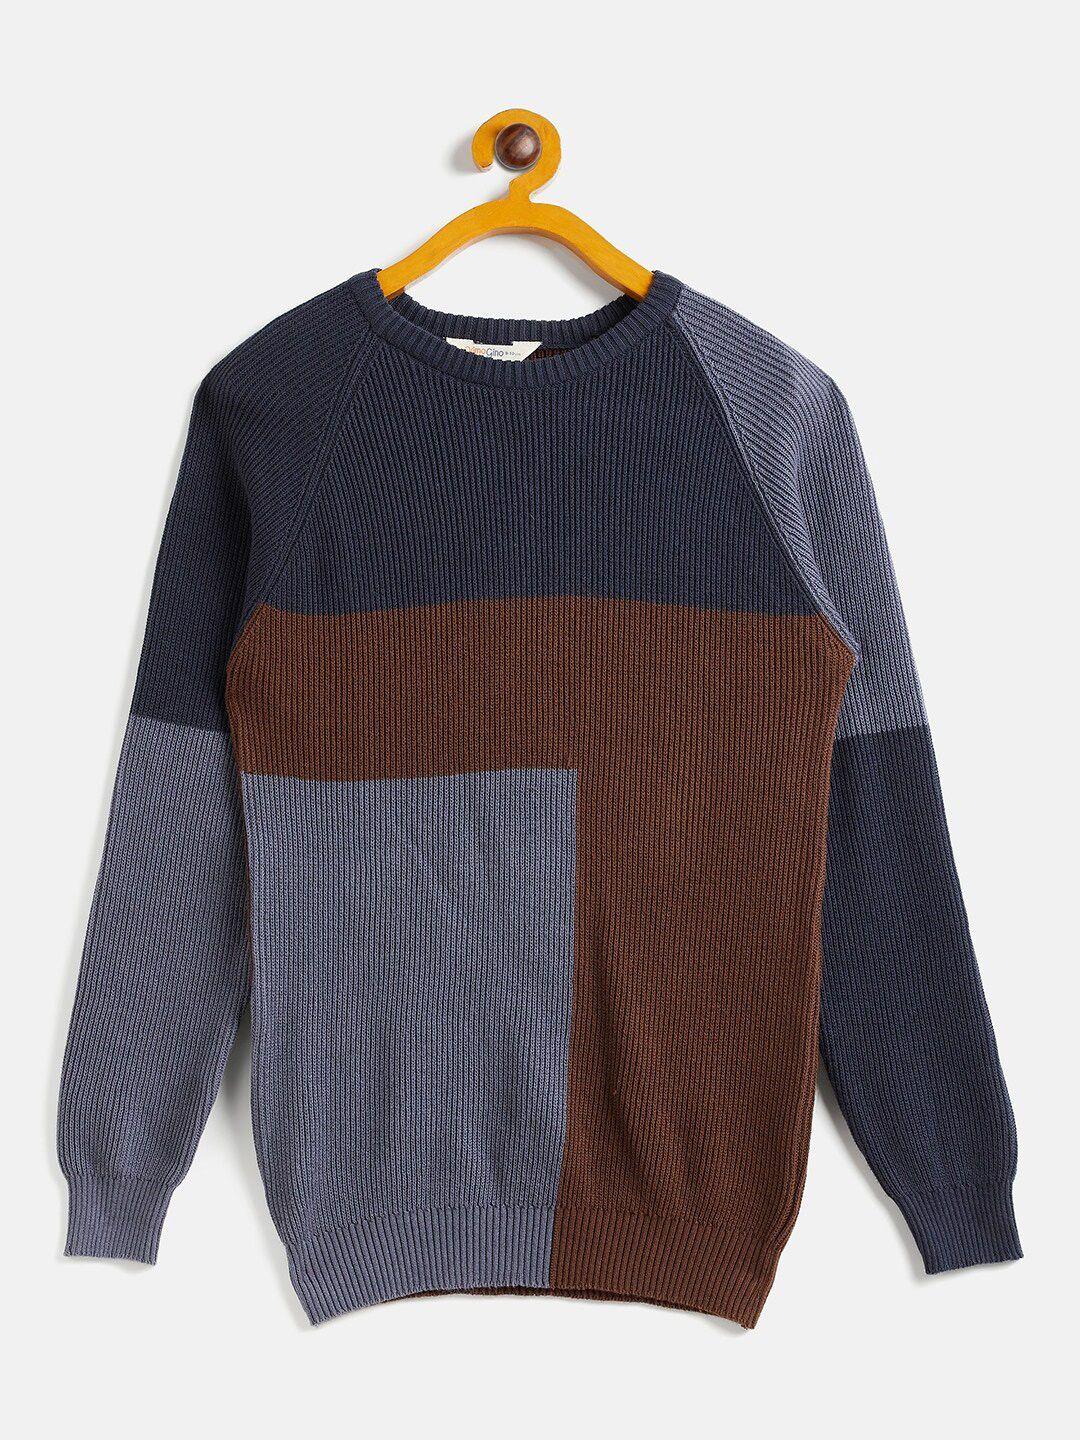 JWAAQ Boys Colourblocked Round Neck Long Sleeves Cotton Pullover Sweater